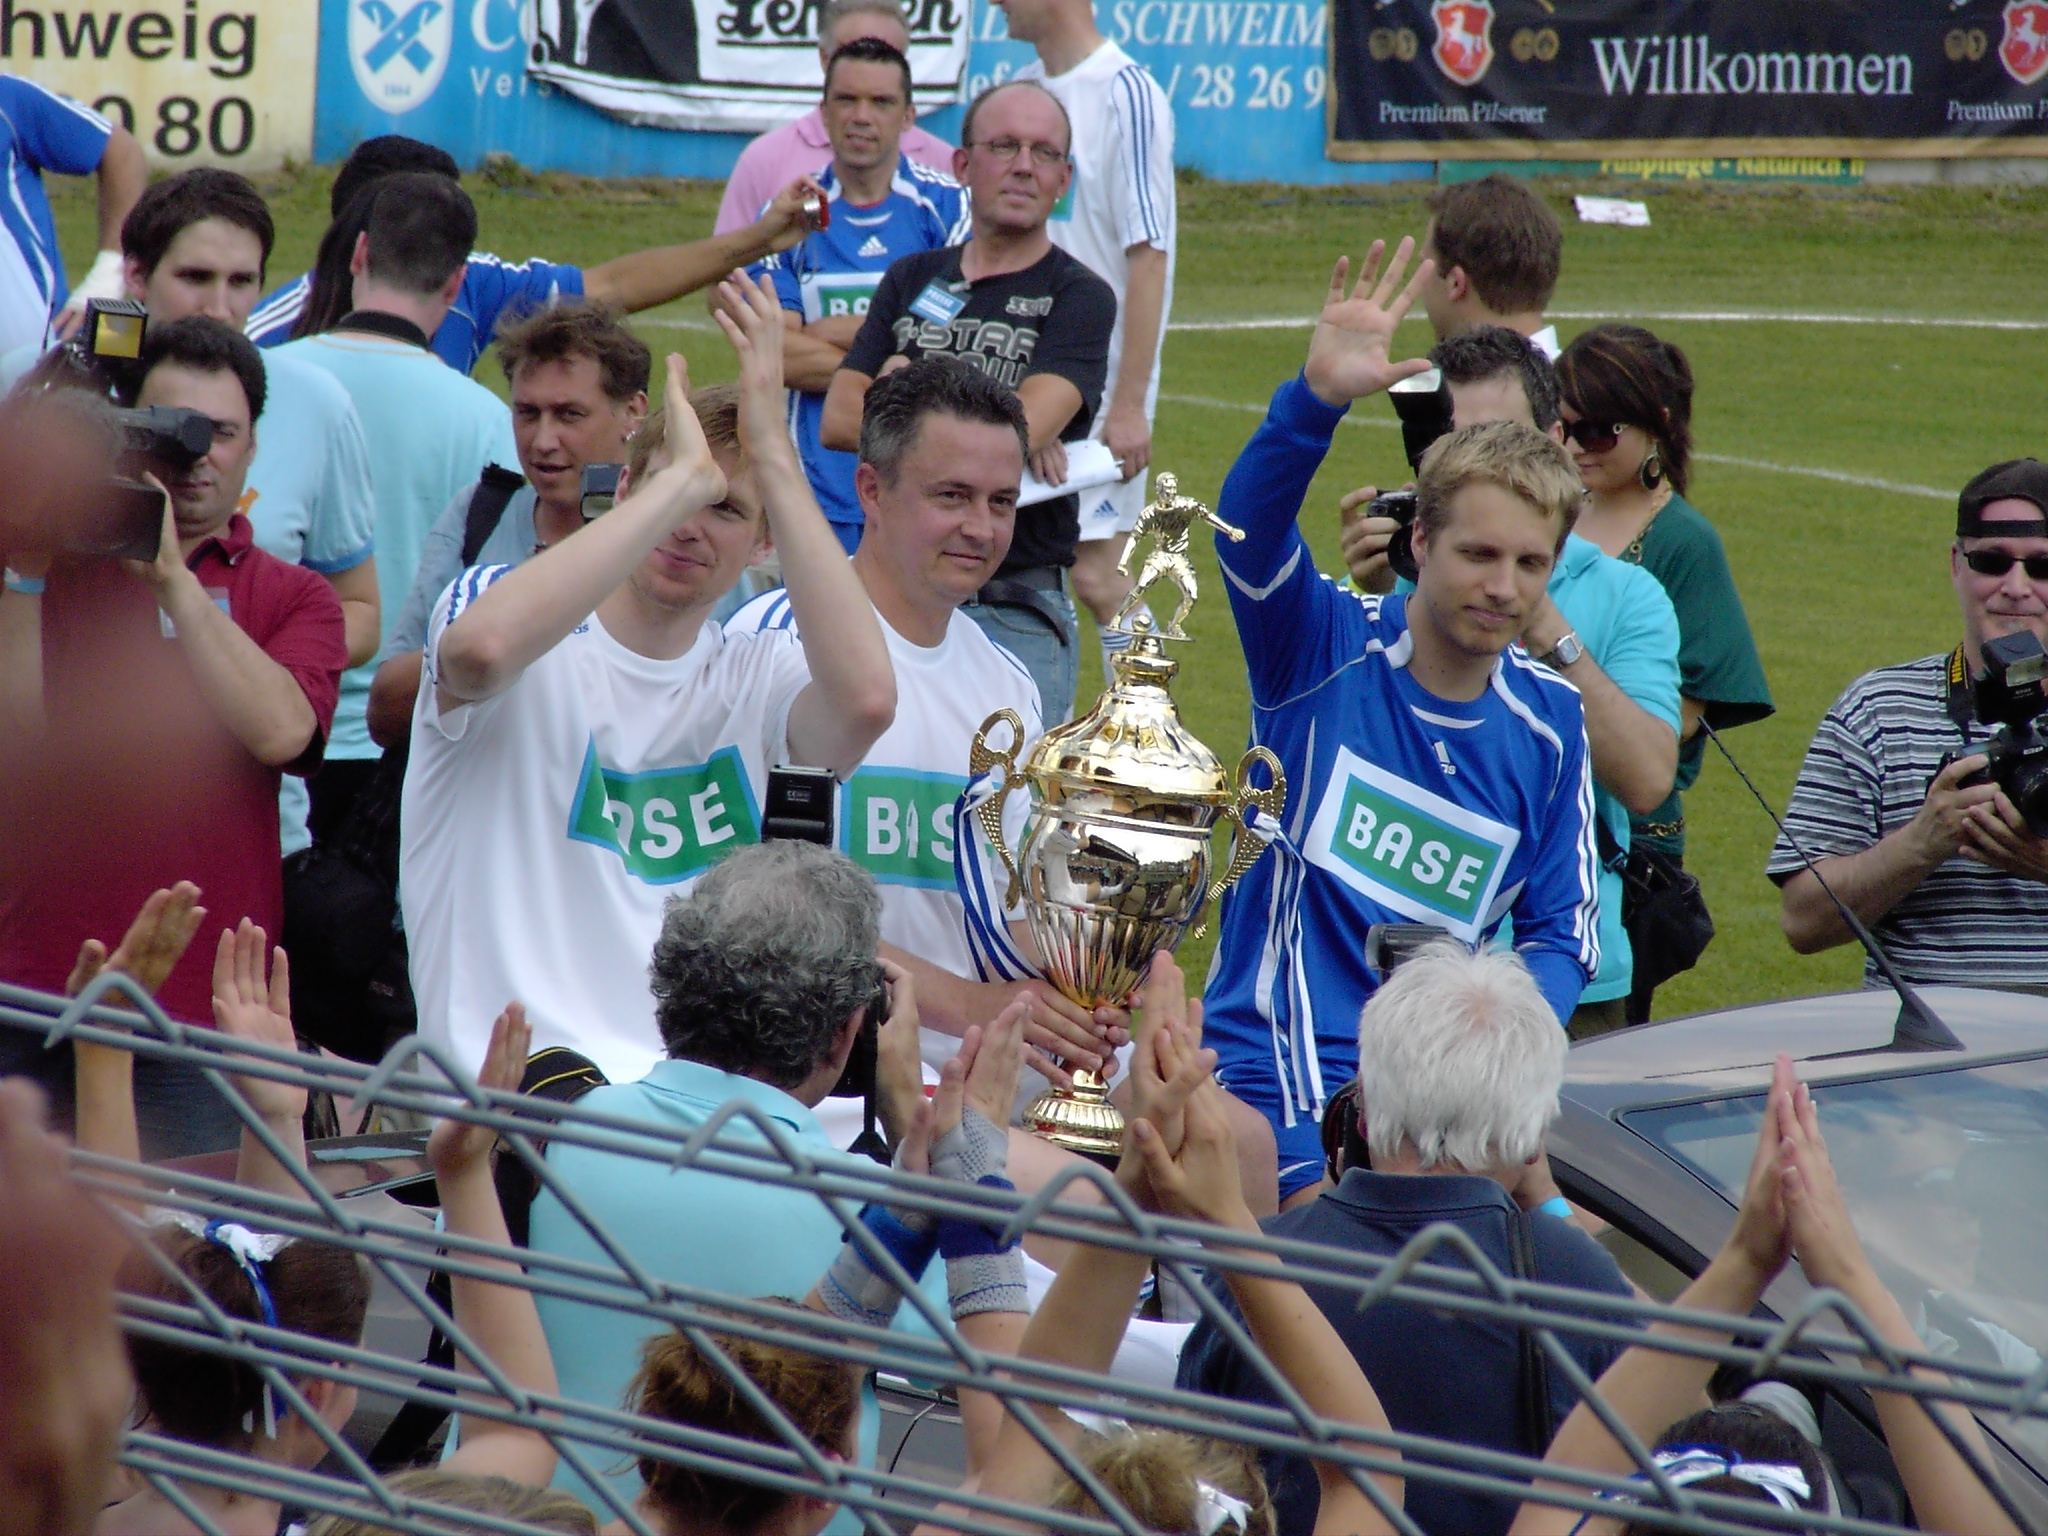 the men are celeting and holding their trophy